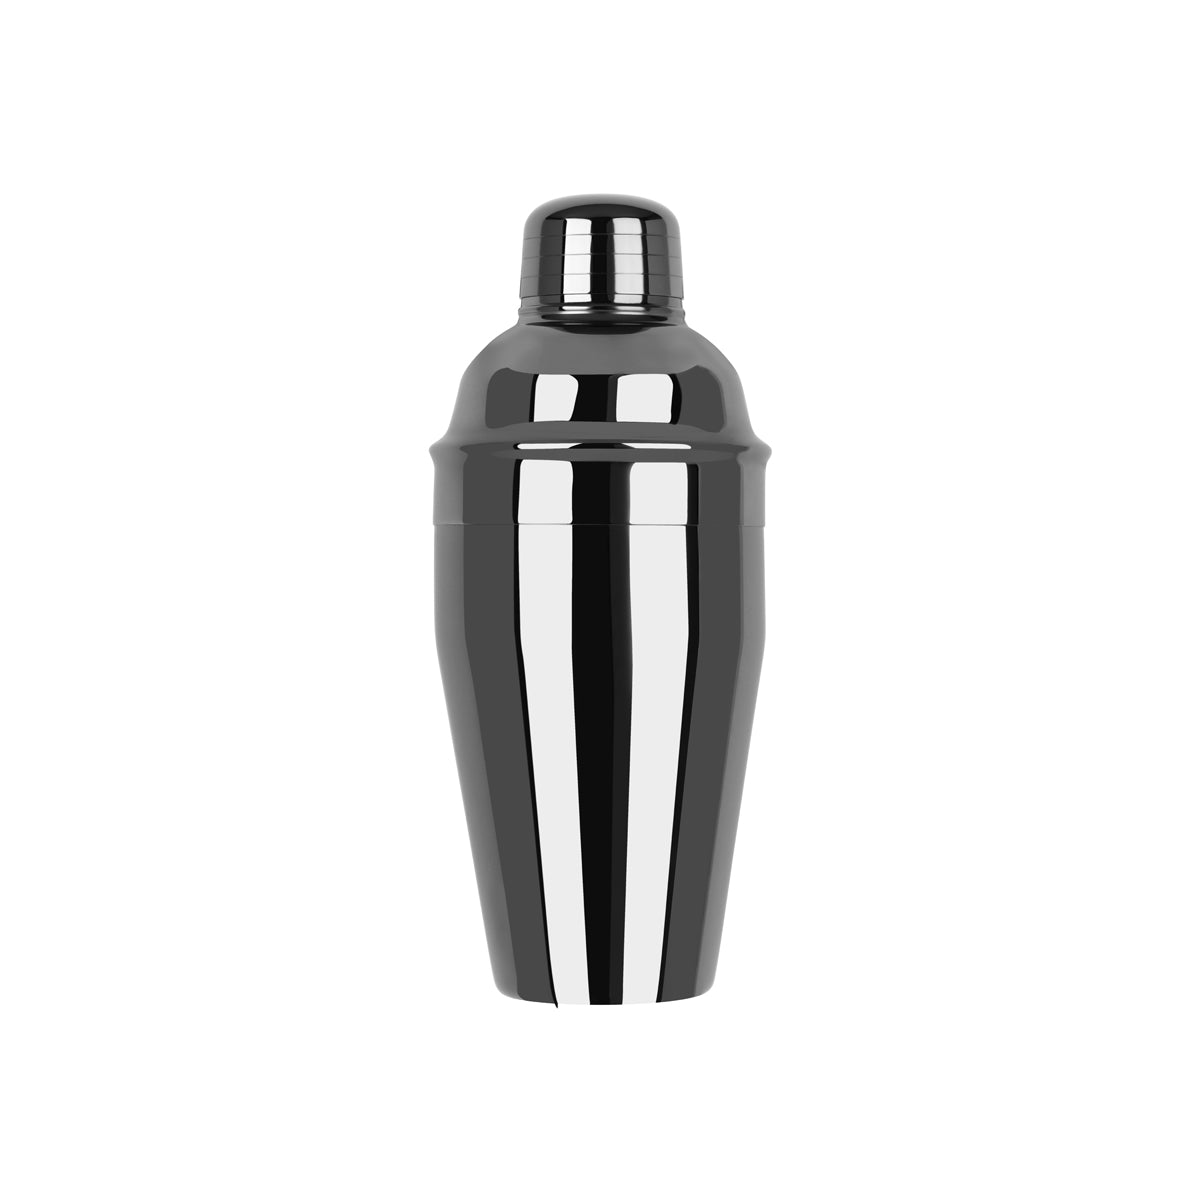 Classic Club Cocktail Shaker - 3Pc, Gun Metal,500Ml from Zanzi. Packed in a gift box and sold in boxes of 1. Hospitality quality at wholesale price with The Flying Fork! 